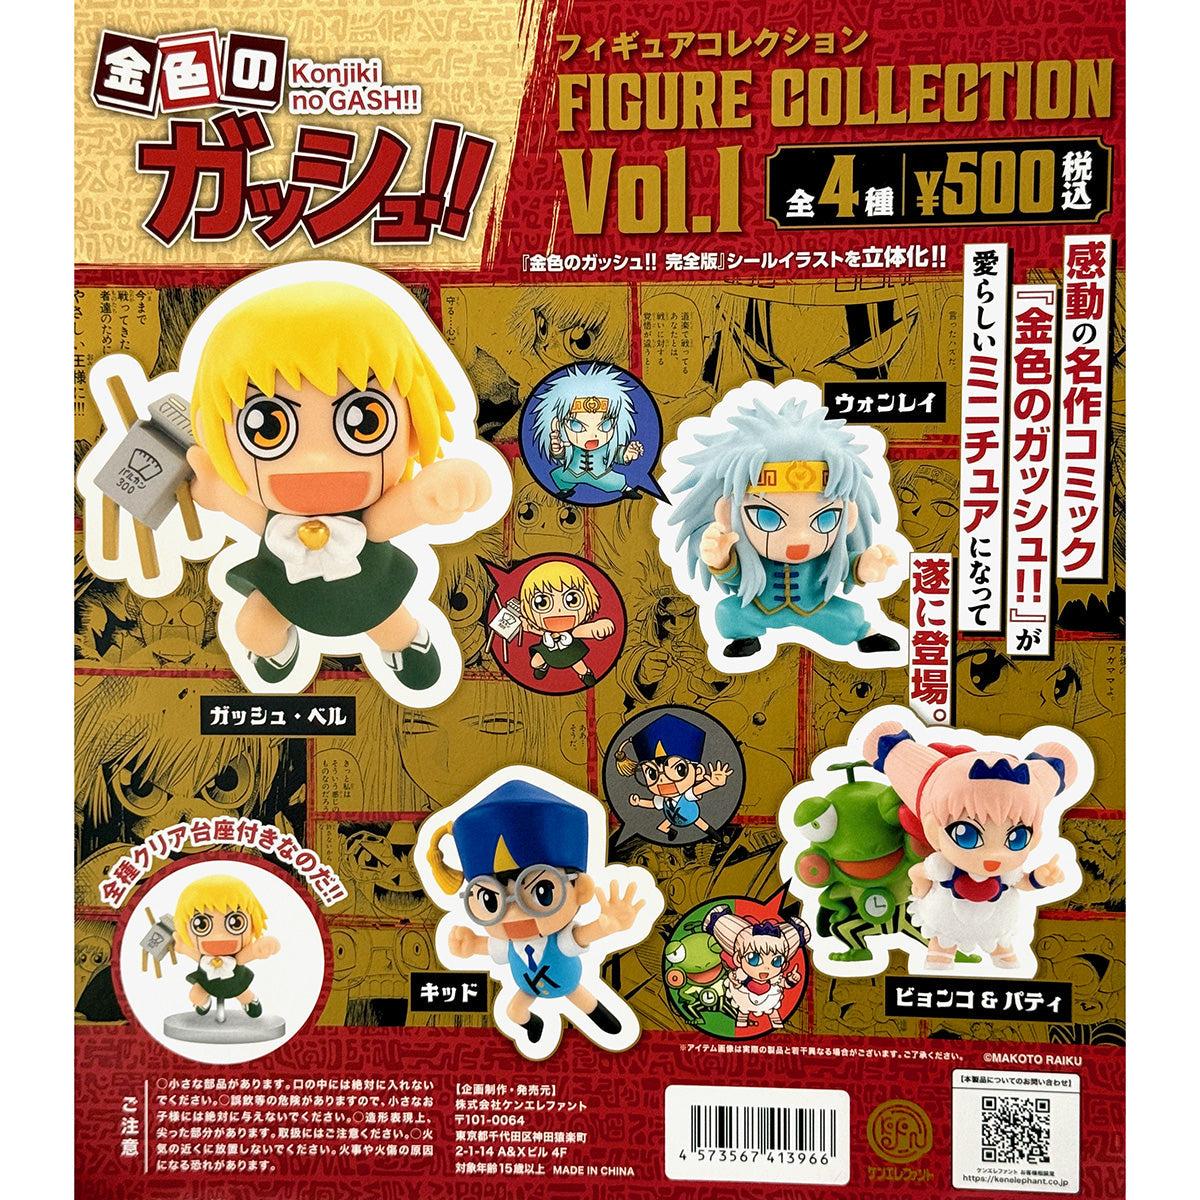 ZATCH BELL / Gash Bell - Collectible Figure Collection 1 (NEW) Japan Exclusive